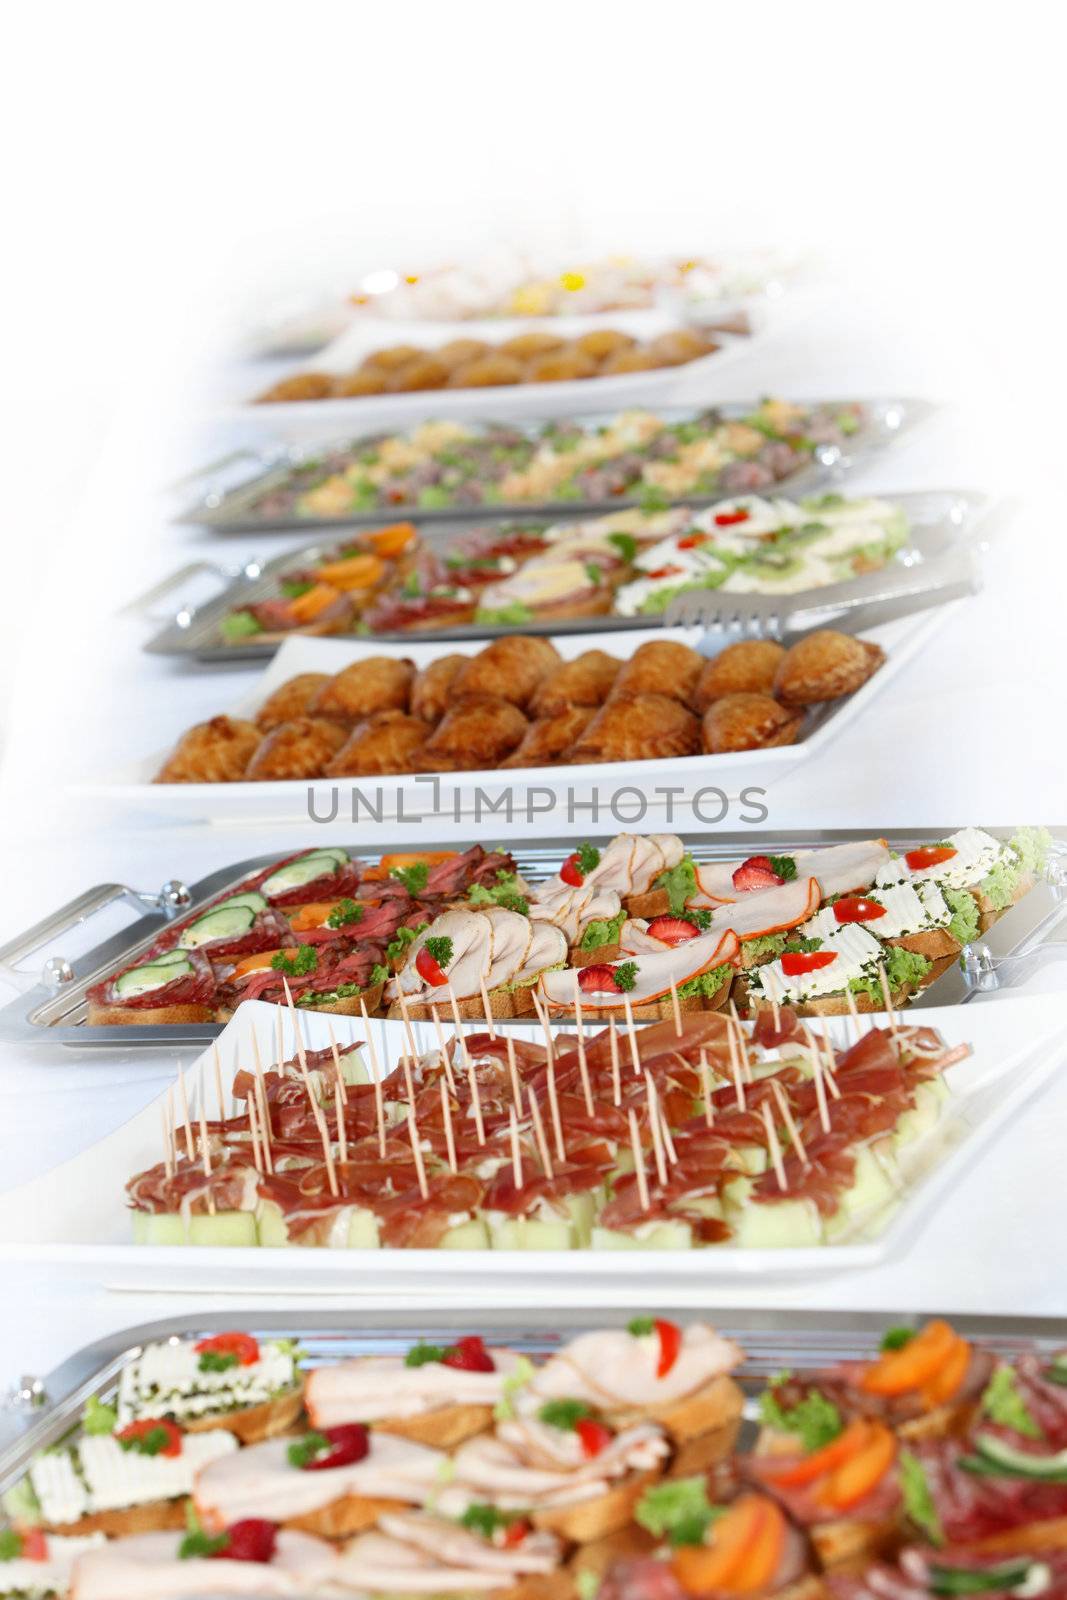 Buffet with appetizers or finger food by Farina6000